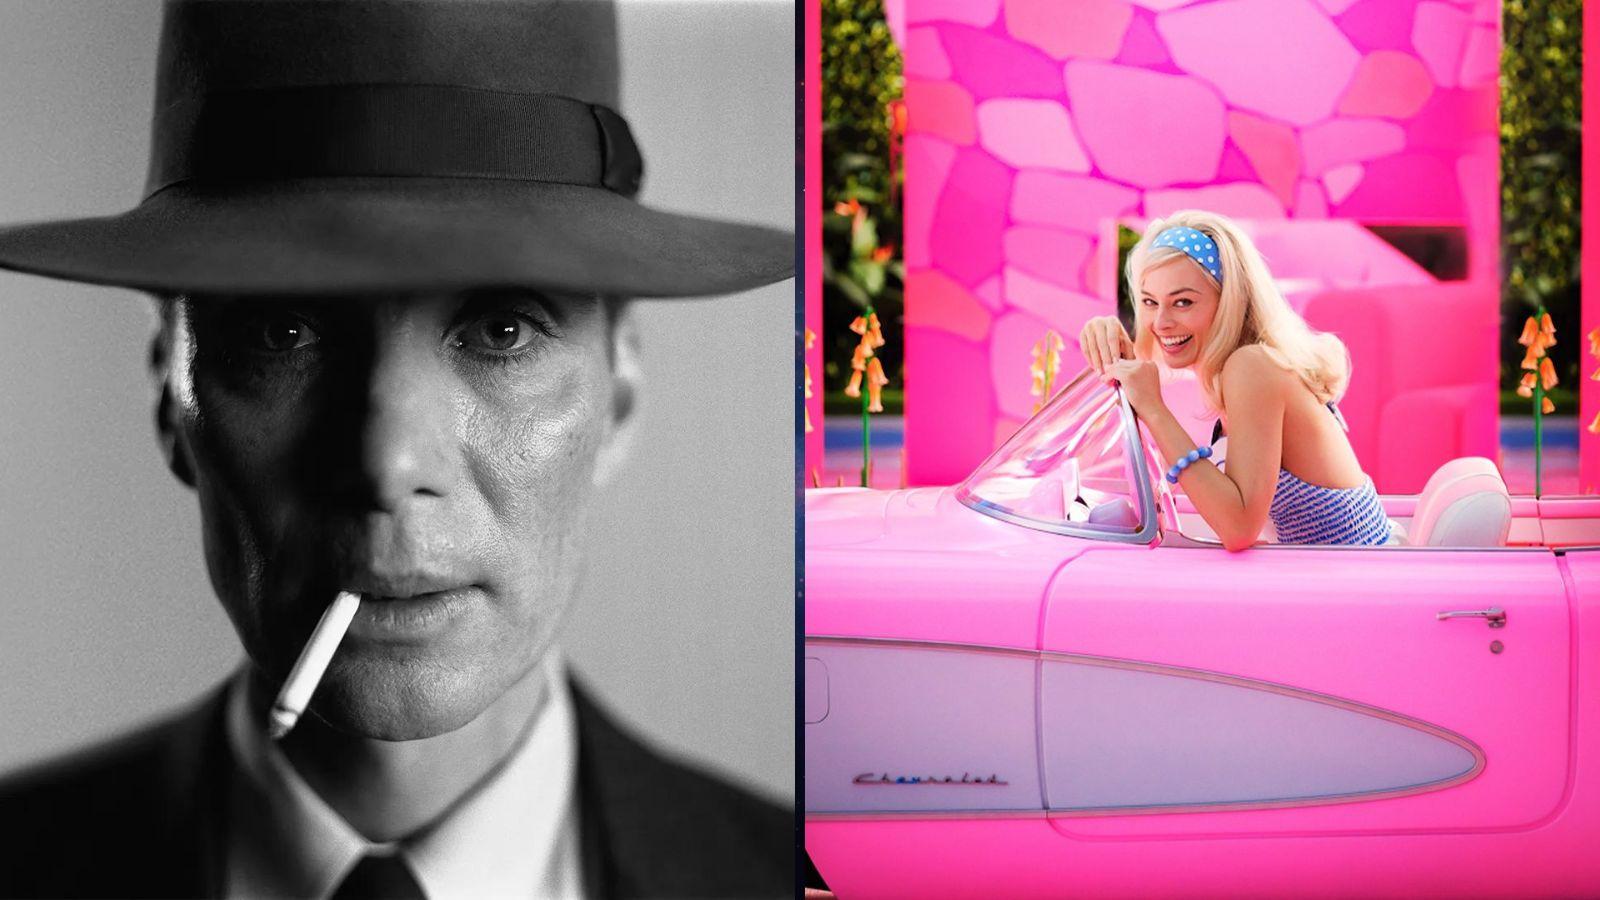 Oppenheimer and Barbie crossover